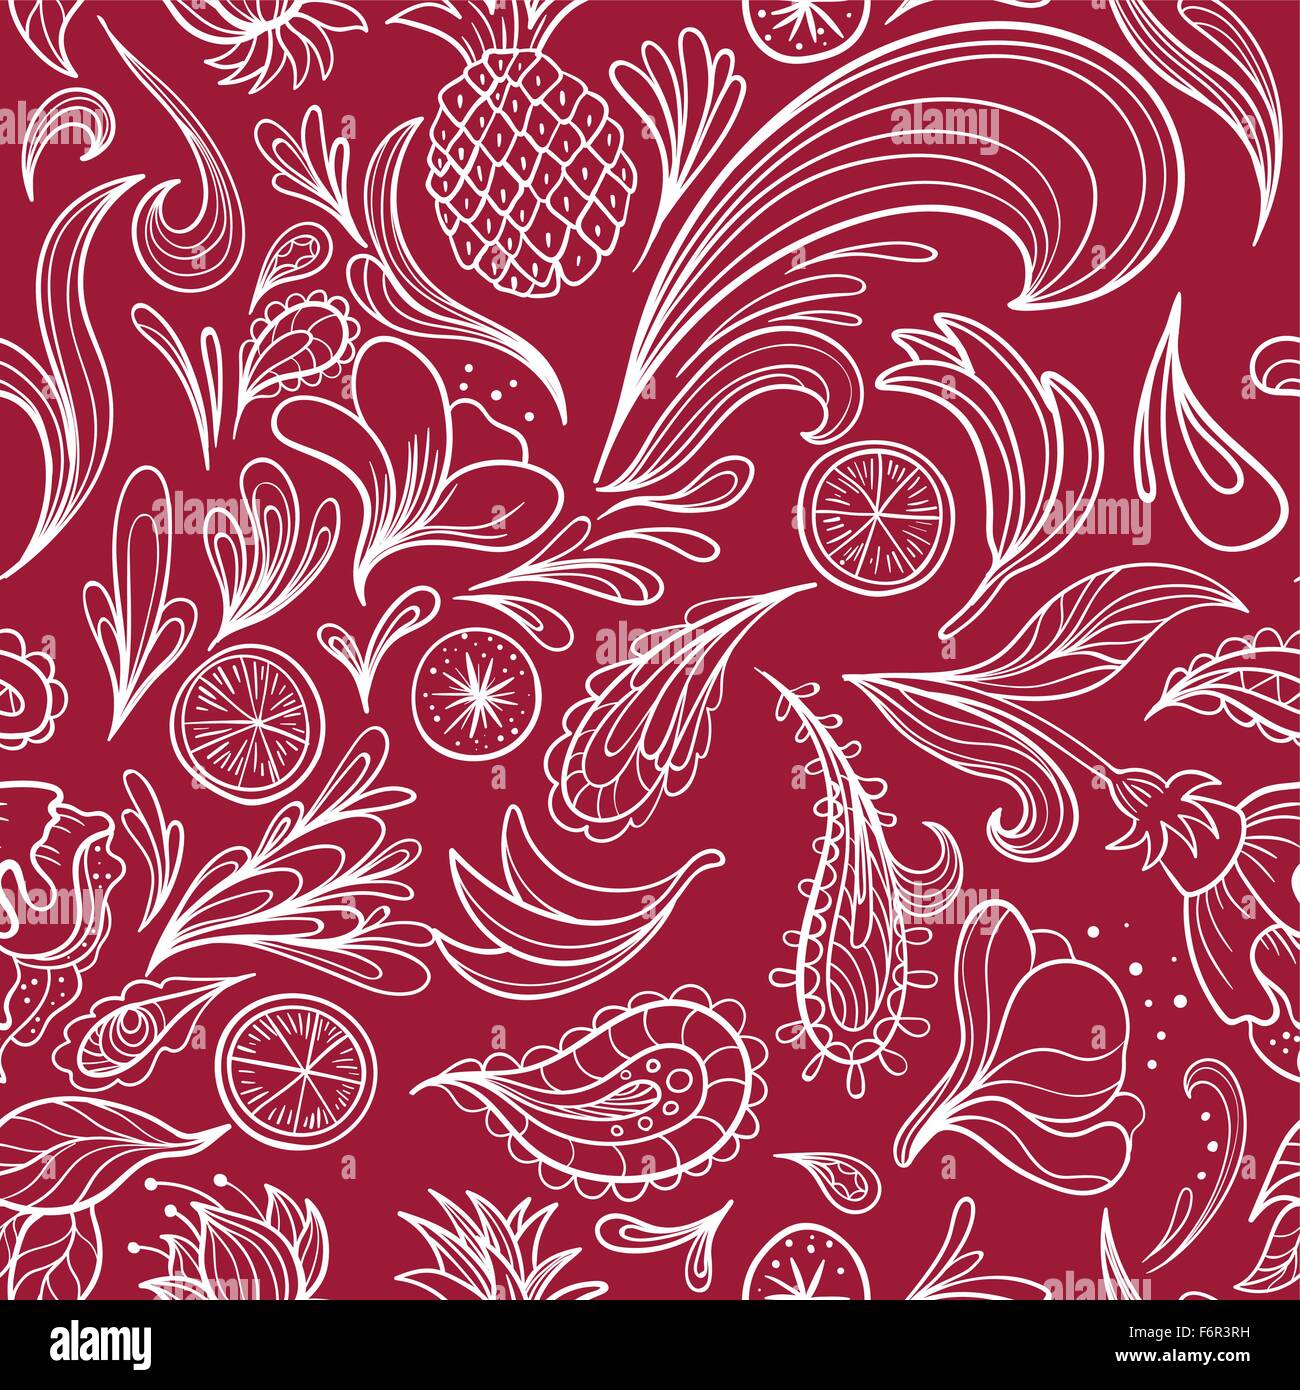 Seamless travel texture with swirls, paisley ornaments and fruits for holiday deign Stock Vector